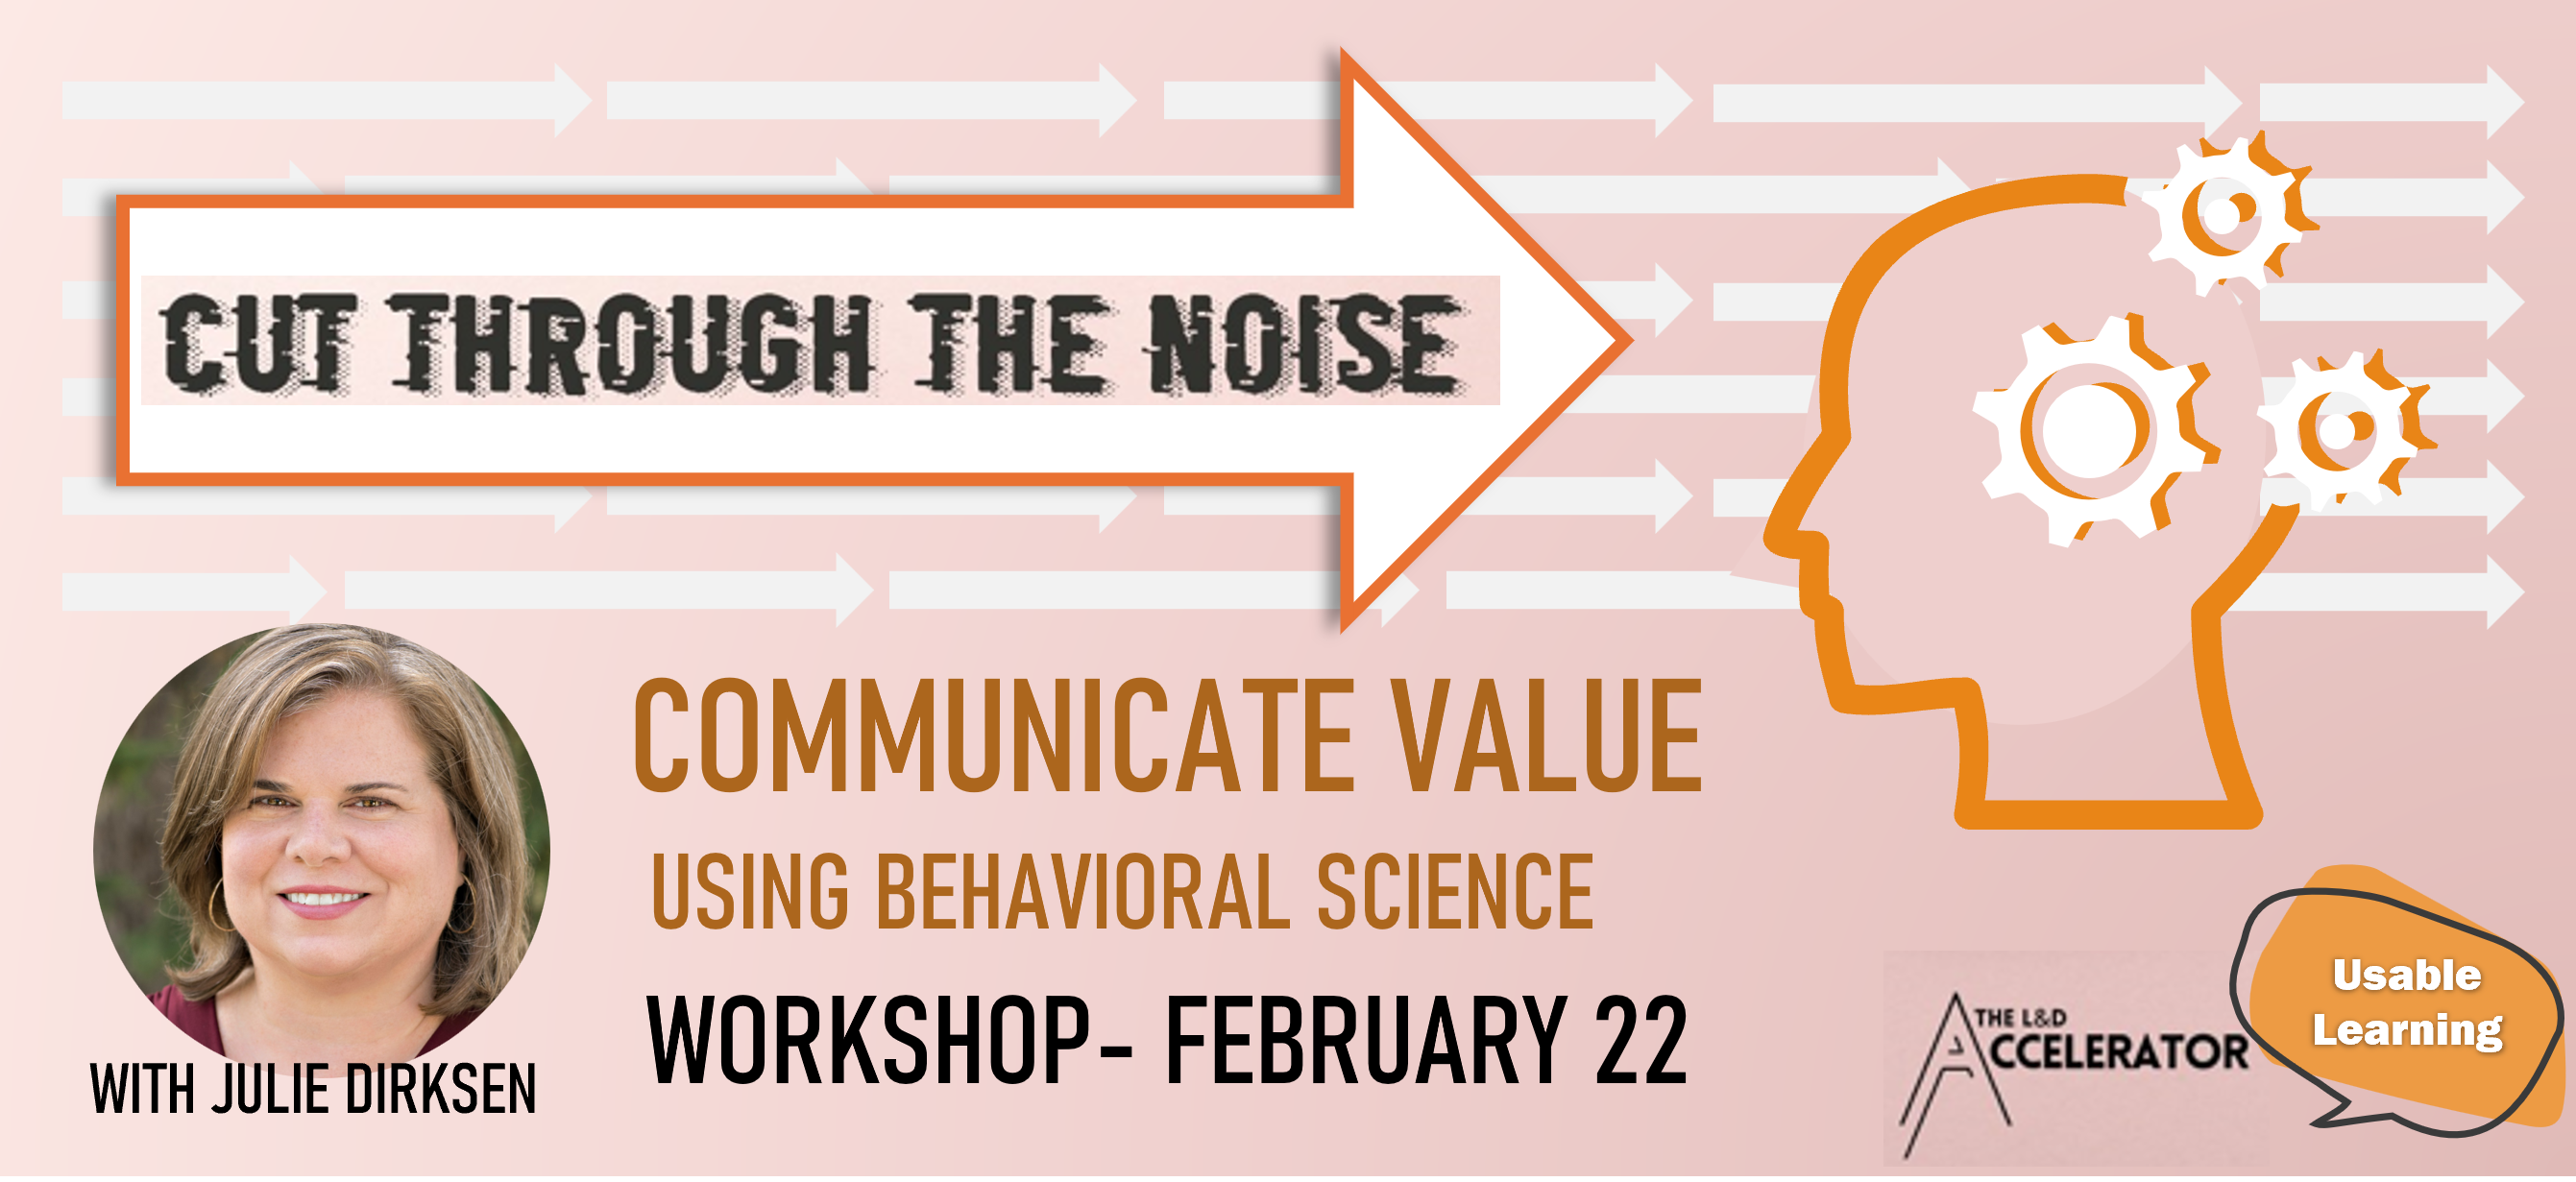 Cut Through the Noise: Communicate Value Using Behavioral Science. Workshop February 22 with Julie Dirksen. Large arrow on a field of smaller arrows pointing at a brain with gears inside. The L&D Accelerator and Usable Learning Logos.